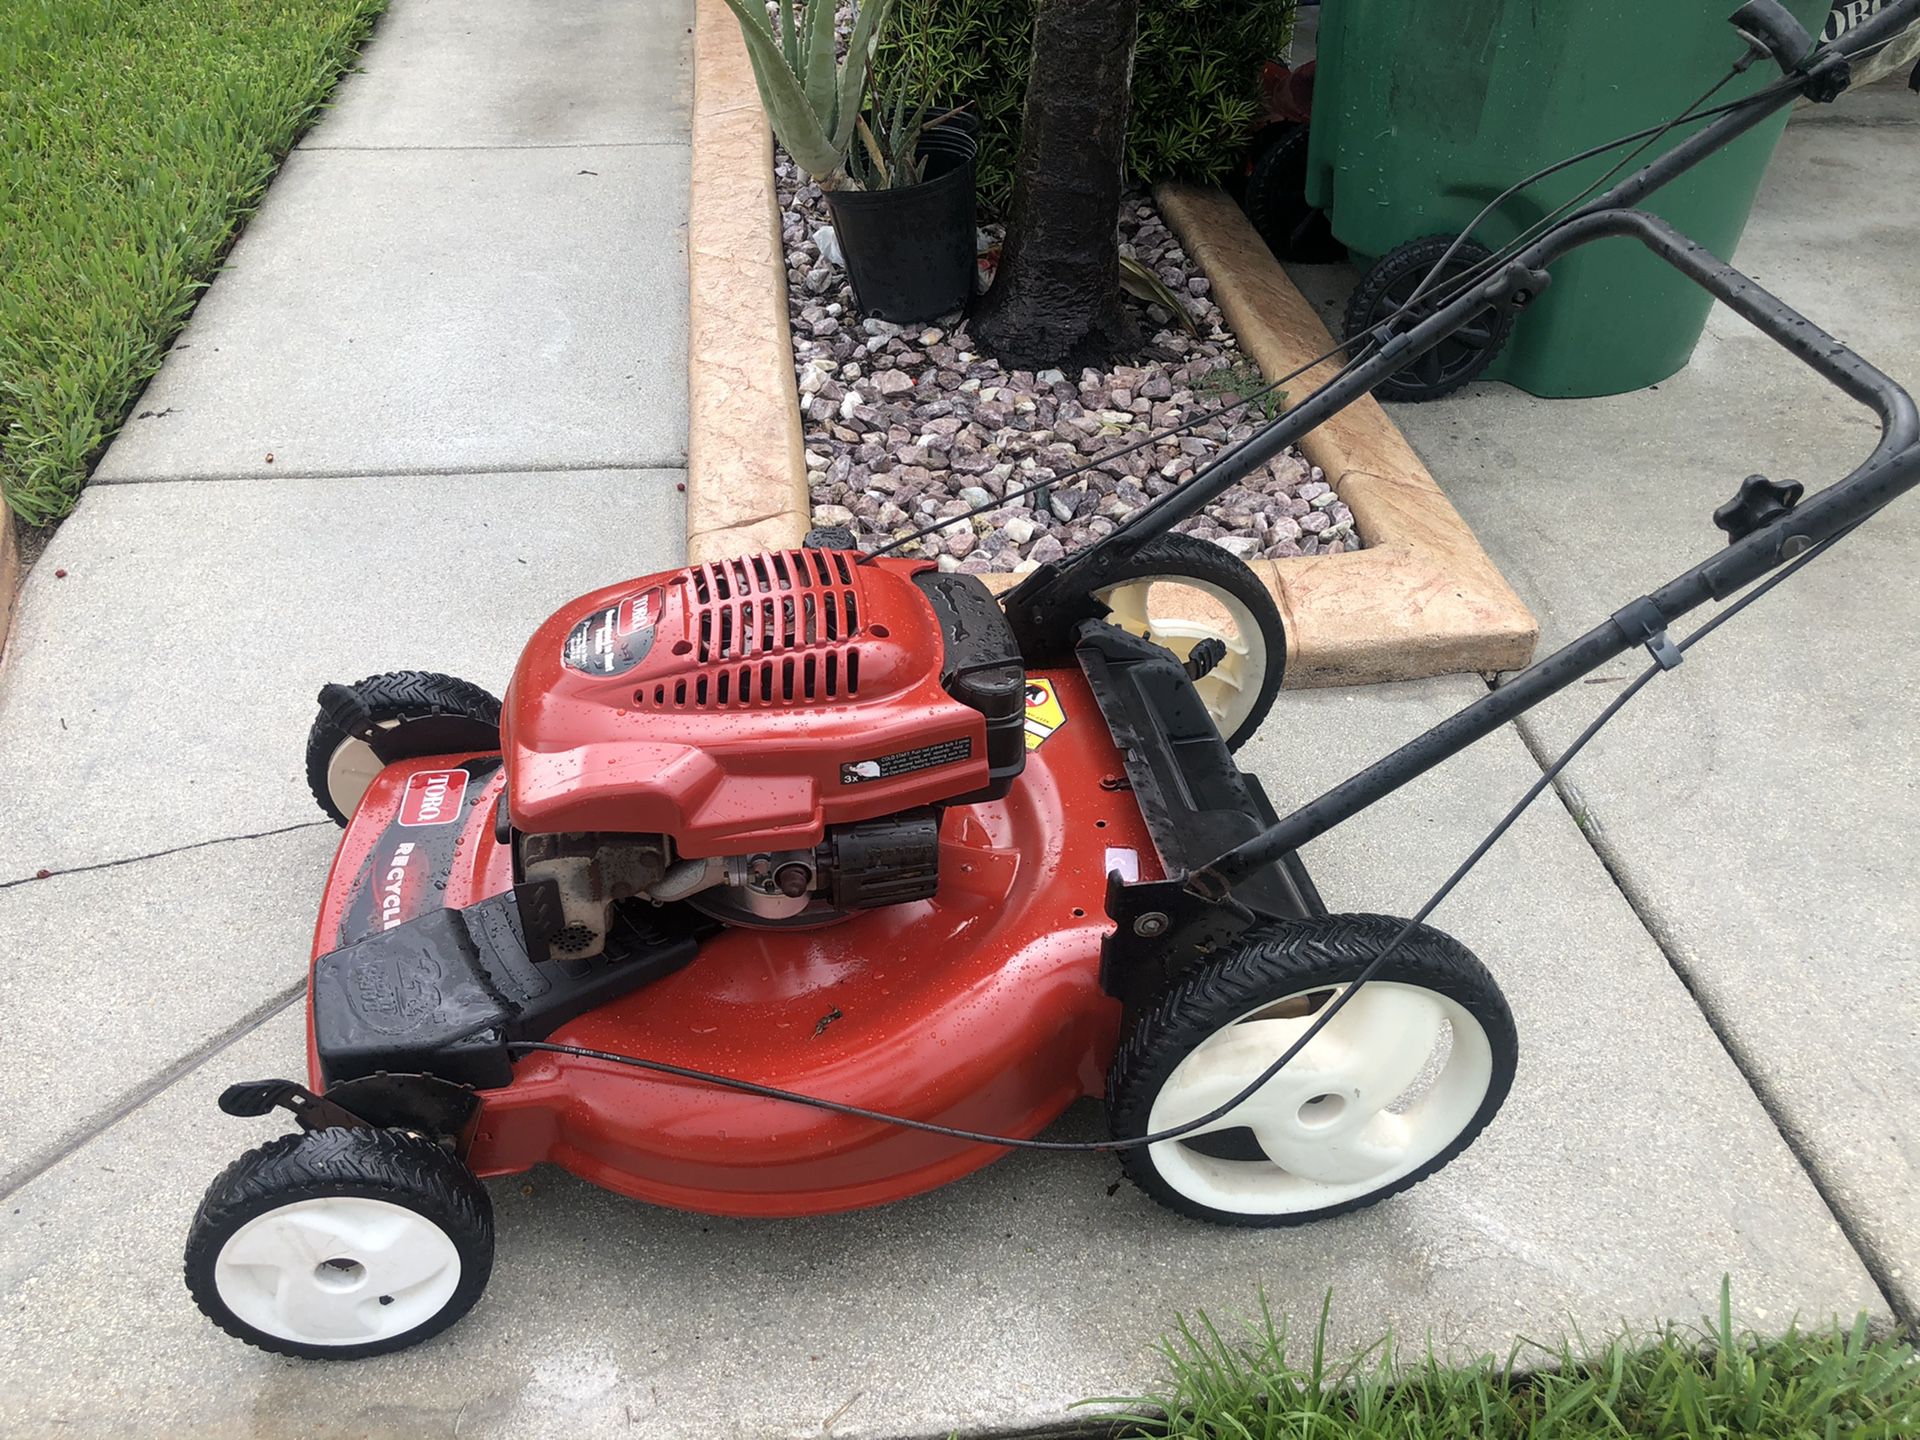 Red toro bull recycler lawn mower self propel works perfect in excellent condition very powerful